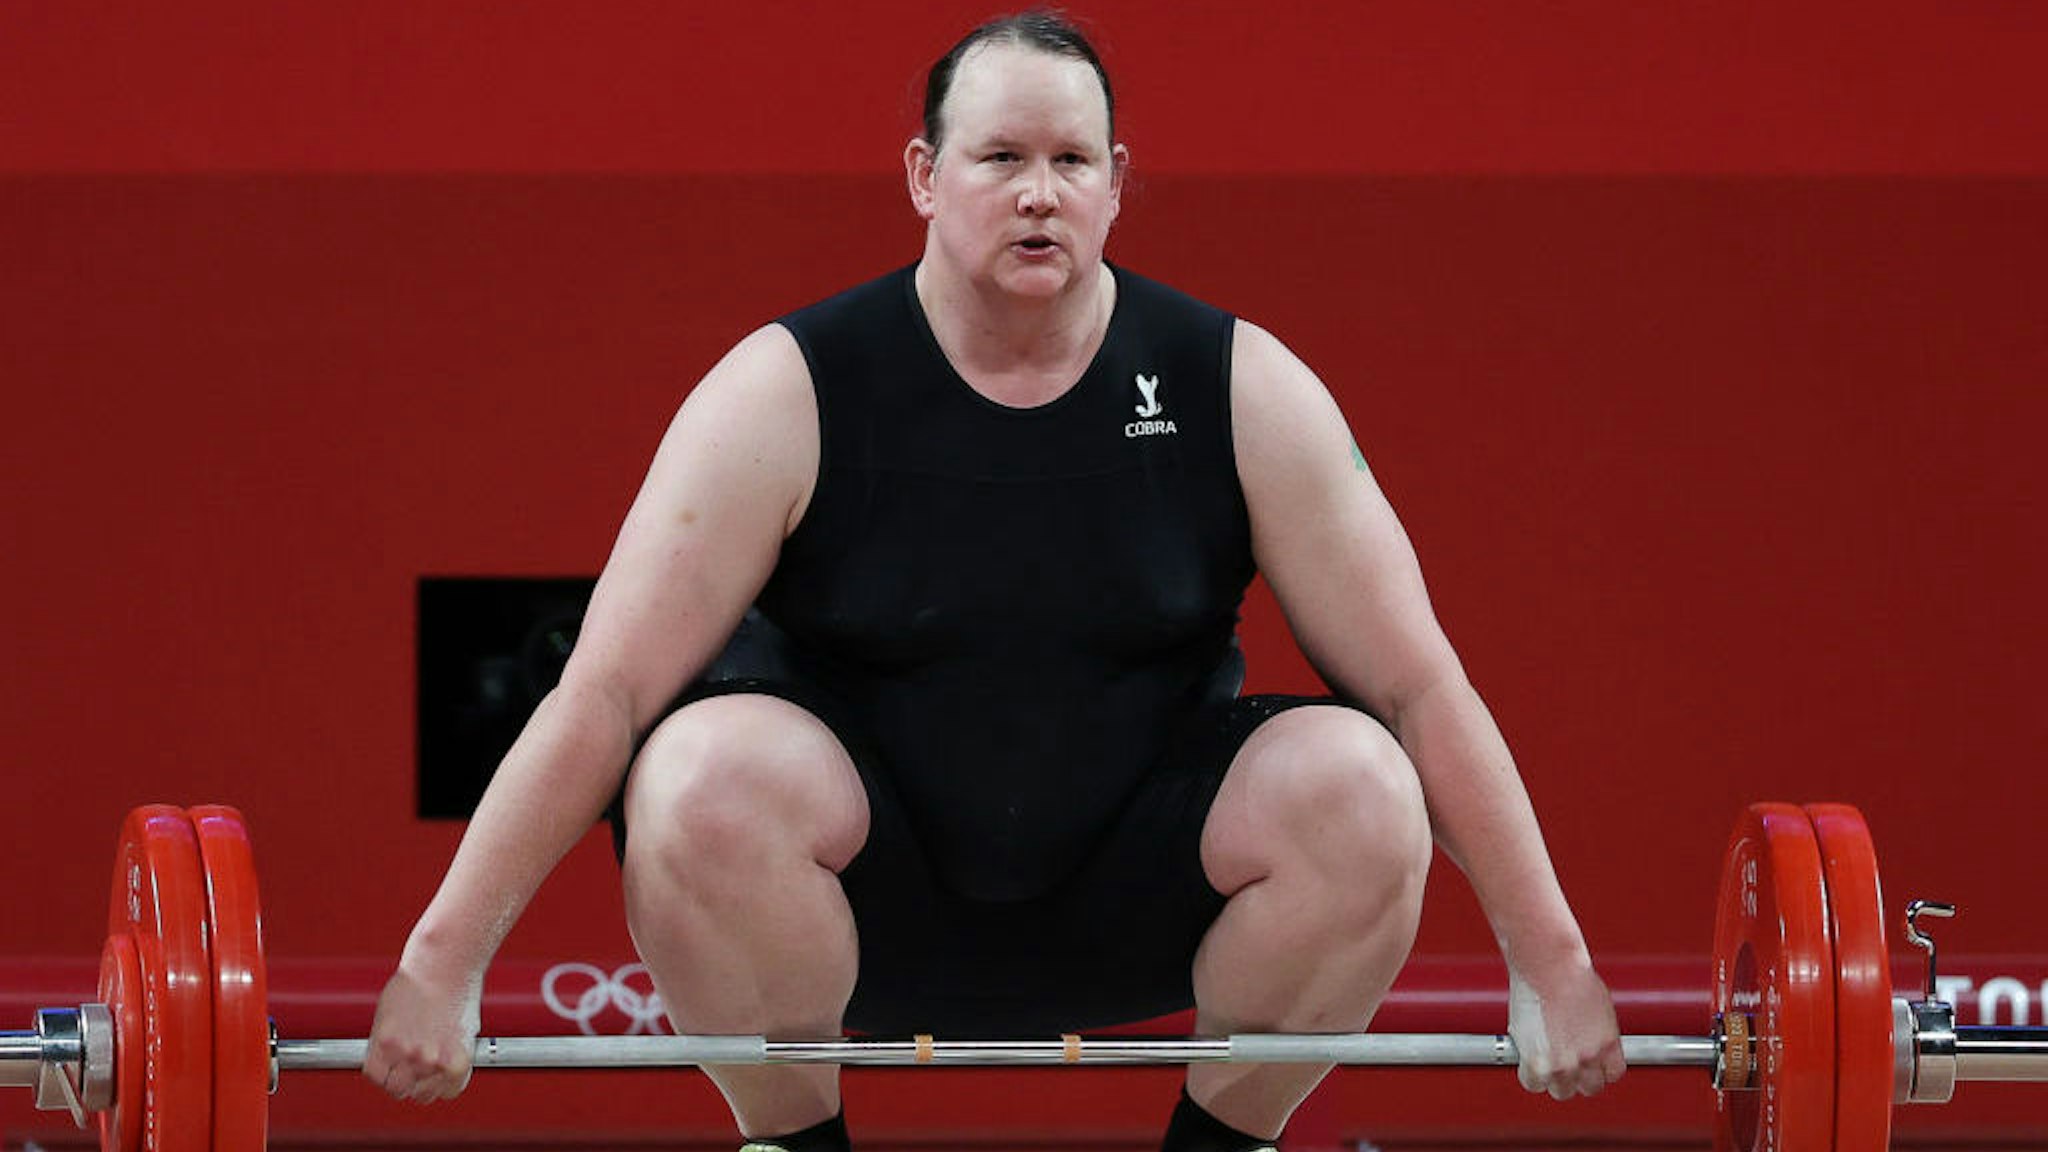 TOKYO, JAPAN - AUGUST 2, 2021: New Zealand's Laurel Hubbard competes in the women's +87kg group A final weightlifting event during the 2020 Summer Olympic Games at the Tokyo International Forum. Laurel Hubbard is the first transgender woman to compete in the Olympics. Stanislav Krasilnikov/TASS (Photo by Stanislav KrasilnikovTASS via Getty Images)